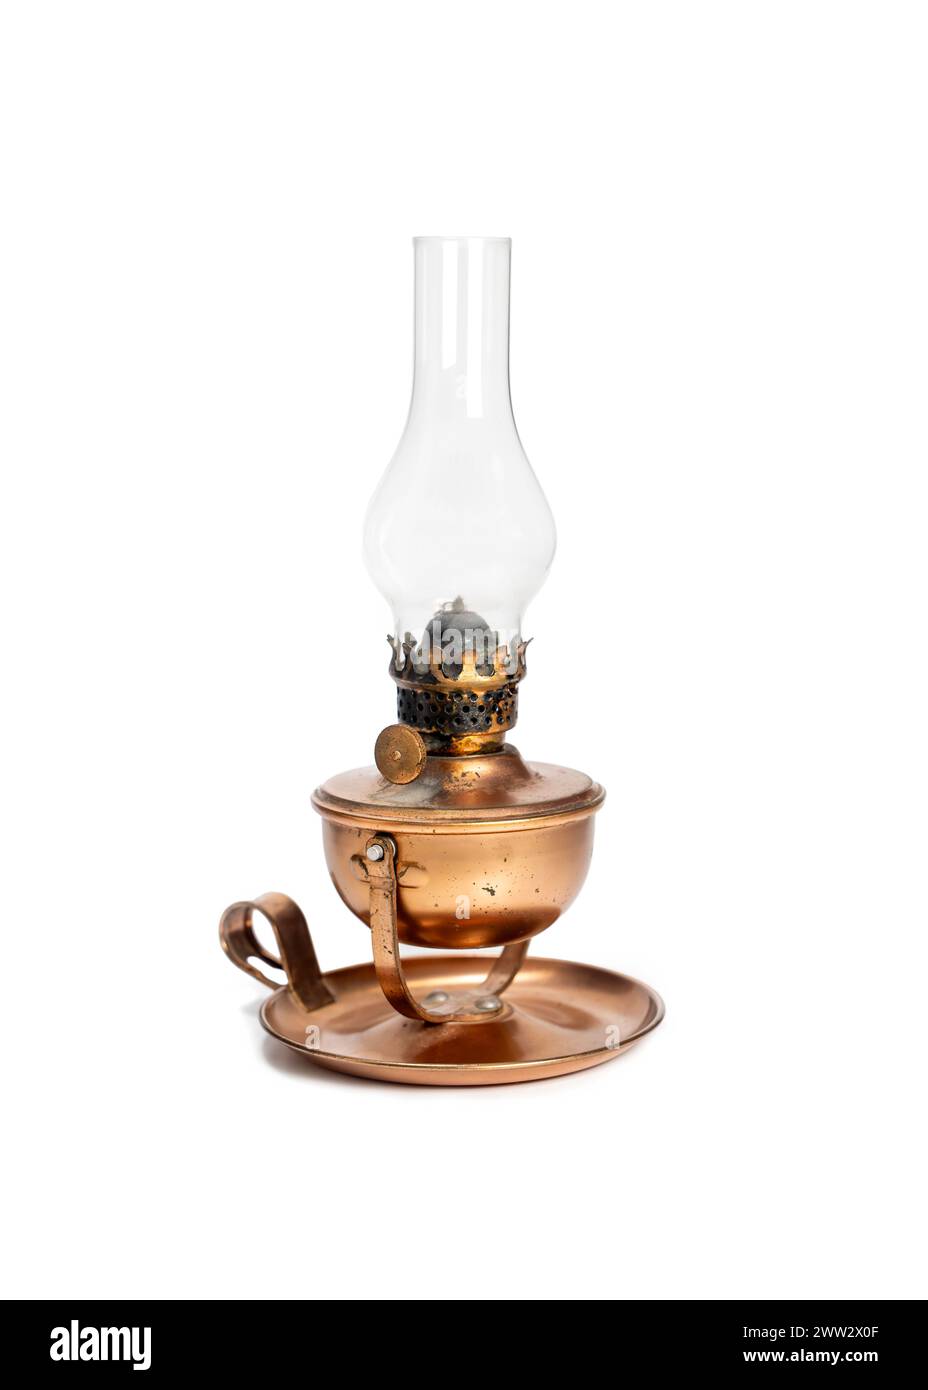 Vintage Oil Lamp With Scratches, Isolated On White Background Stock Photo